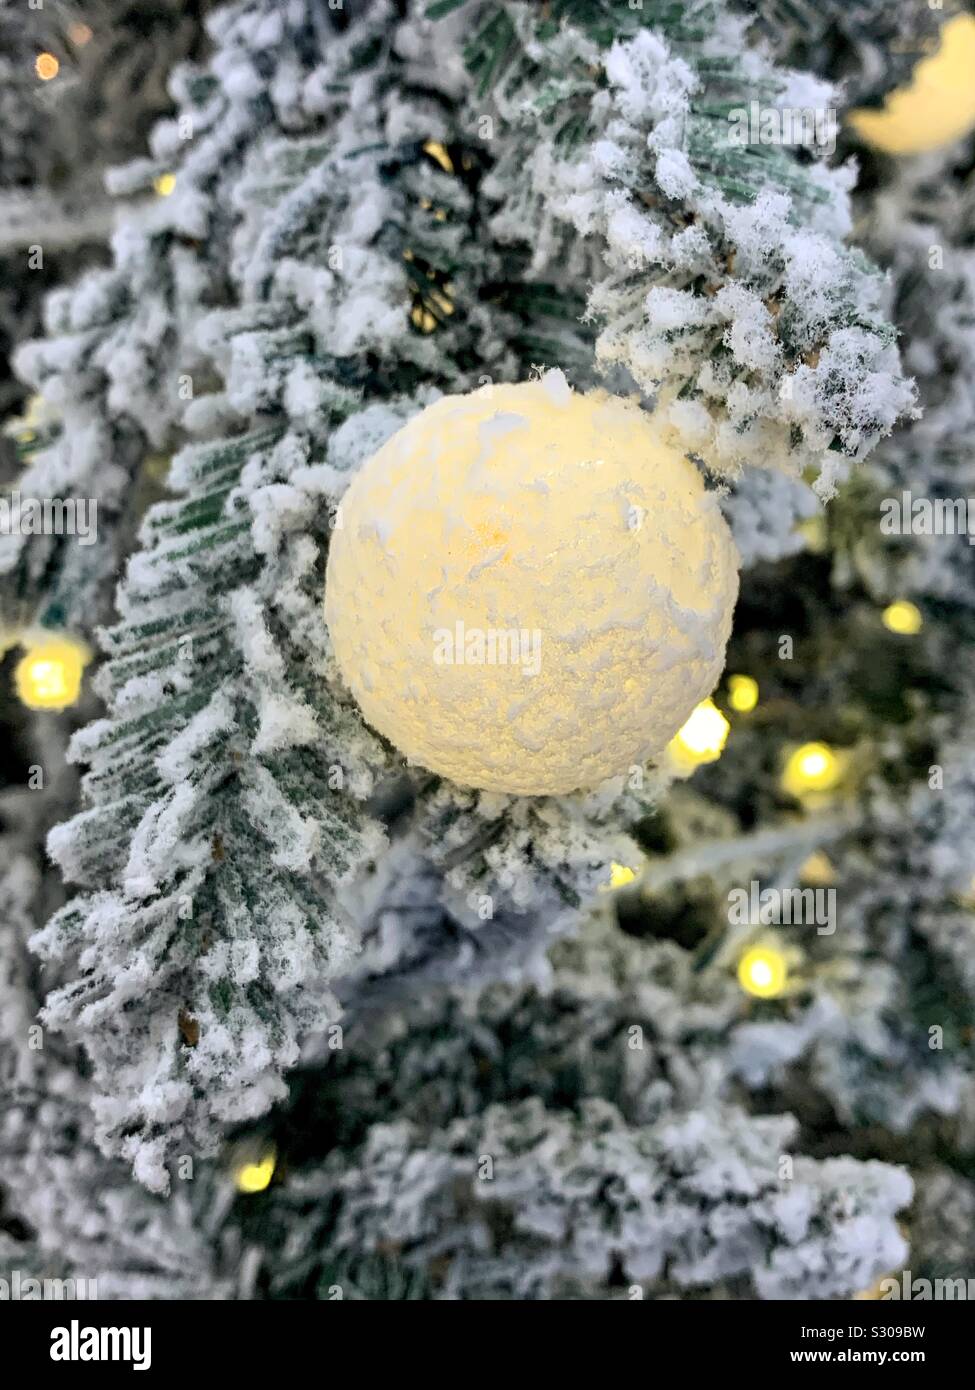 Softly glowing Christmas tree ornament hanging on a snowy pine tree Stock Photo